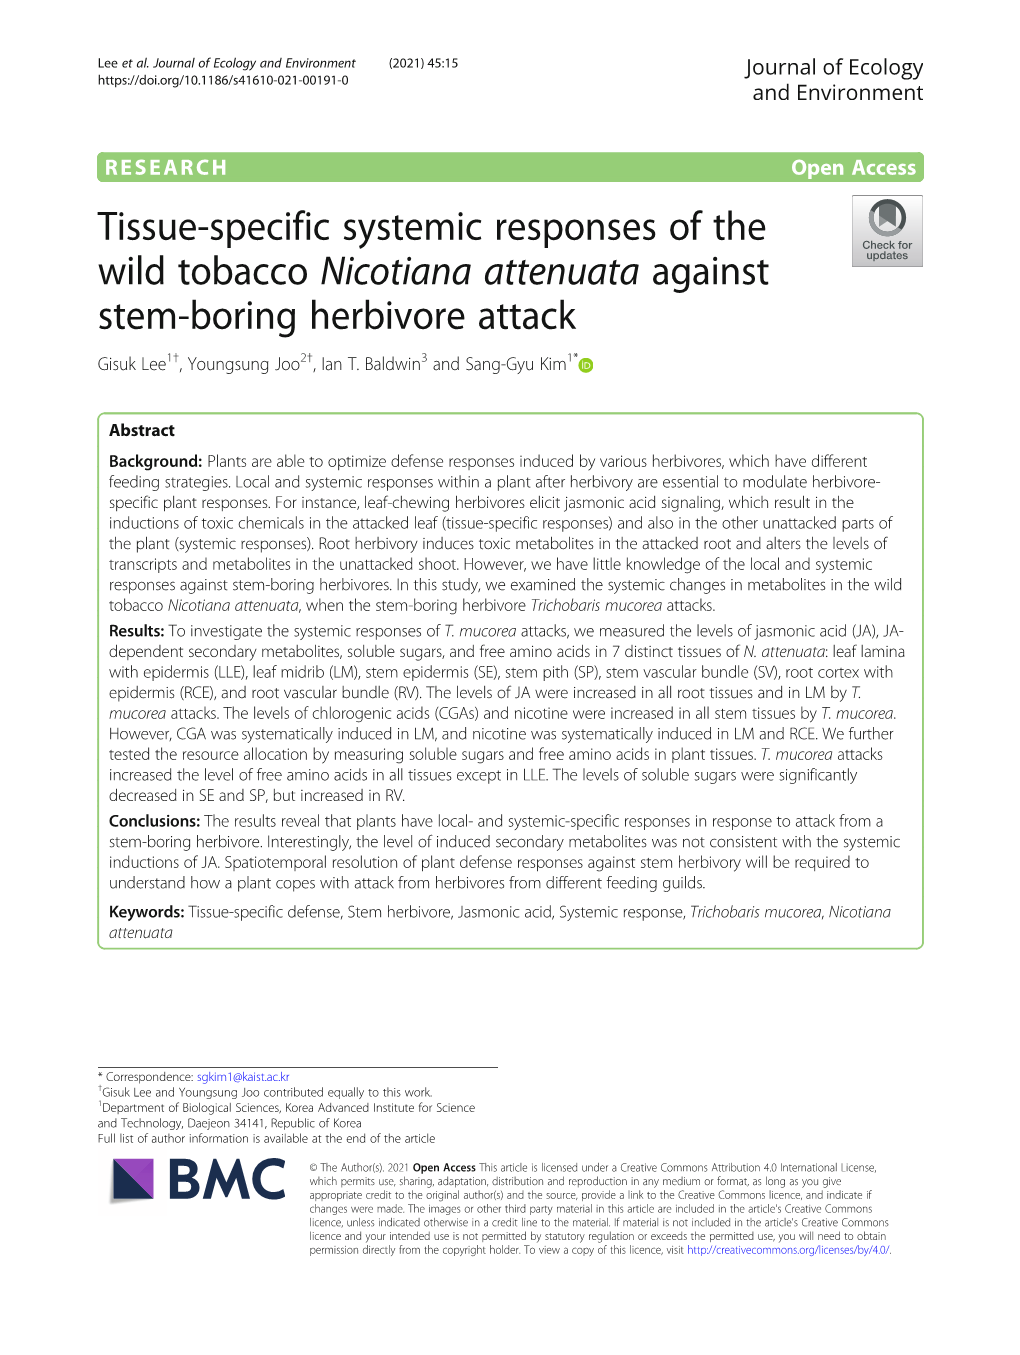 Tissue-Specific Systemic Responses of the Wild Tobacco Nicotiana Attenuata Against Stem-Boring Herbivore Attack Gisuk Lee1†, Youngsung Joo2†, Ian T